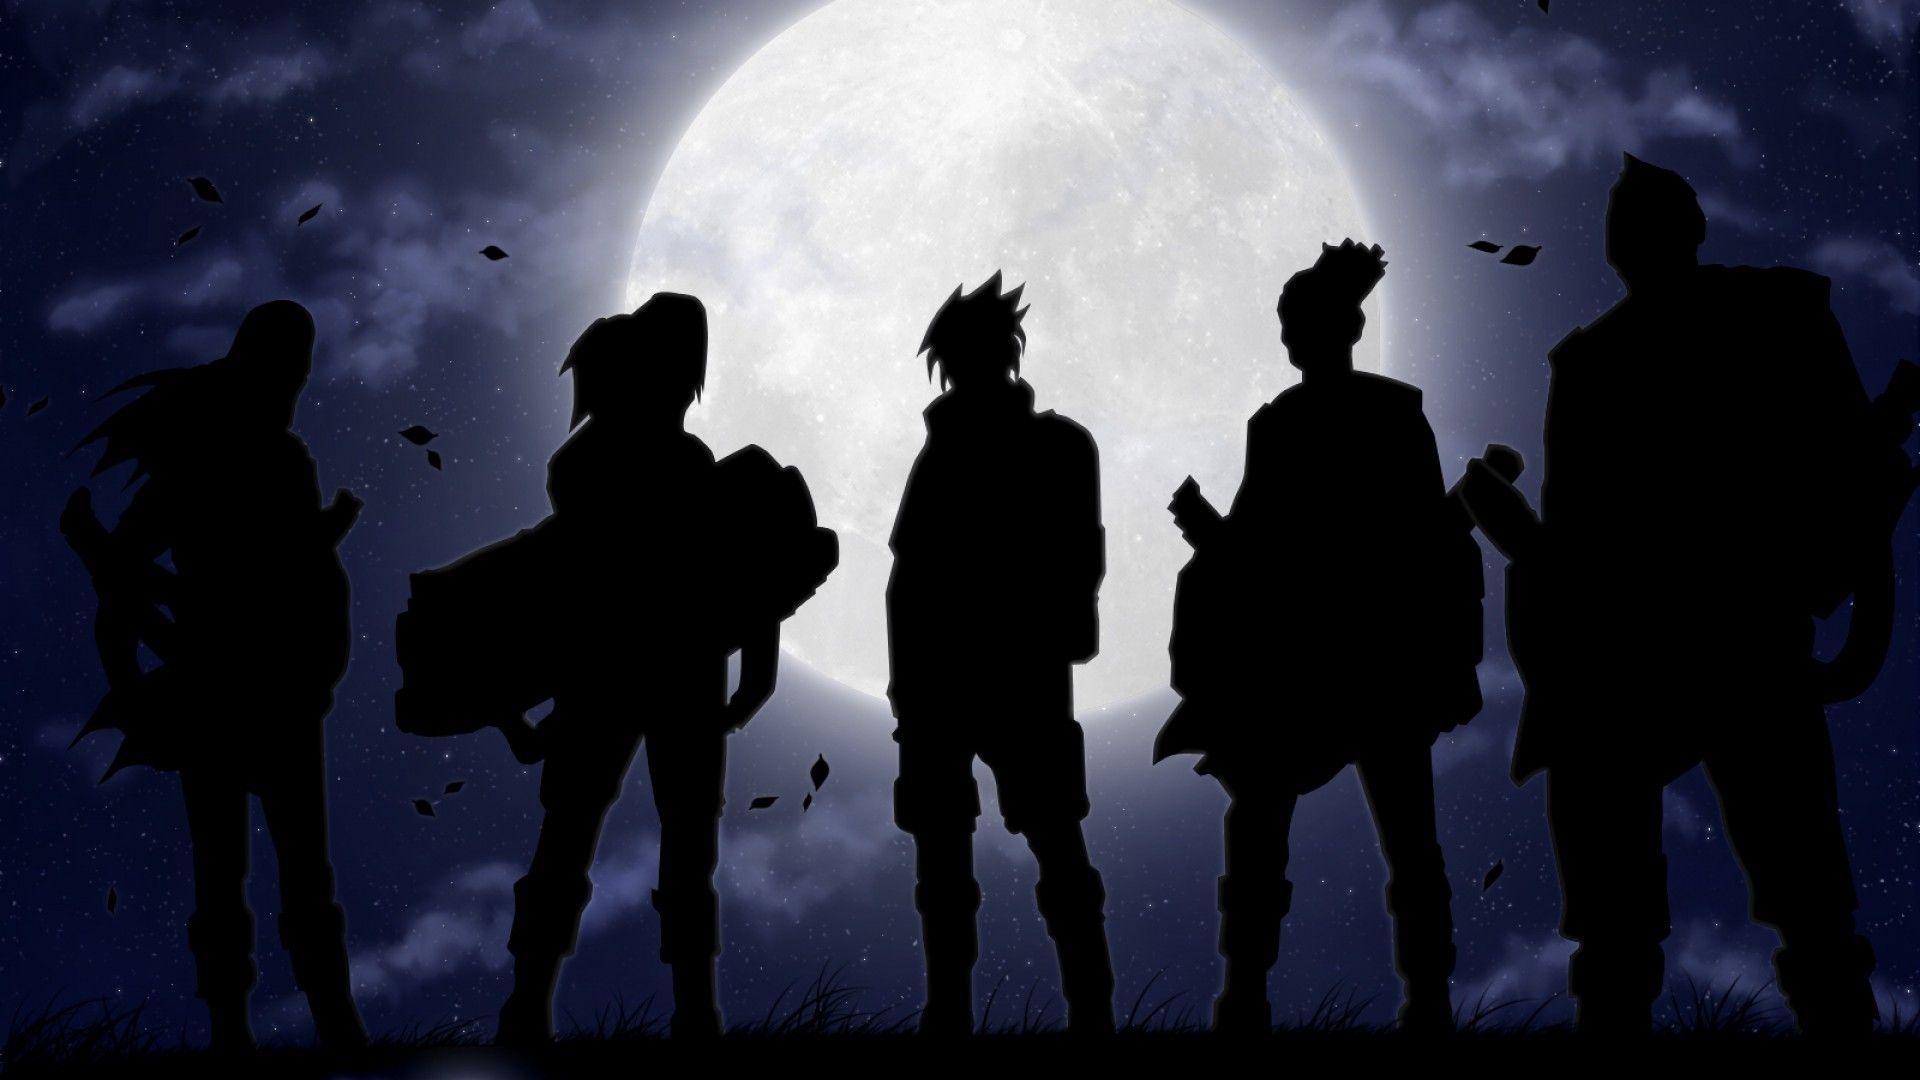 Naruto backgrounds 1080P 2K 4K 5K HD wallpapers free download  Wallpaper  Flare